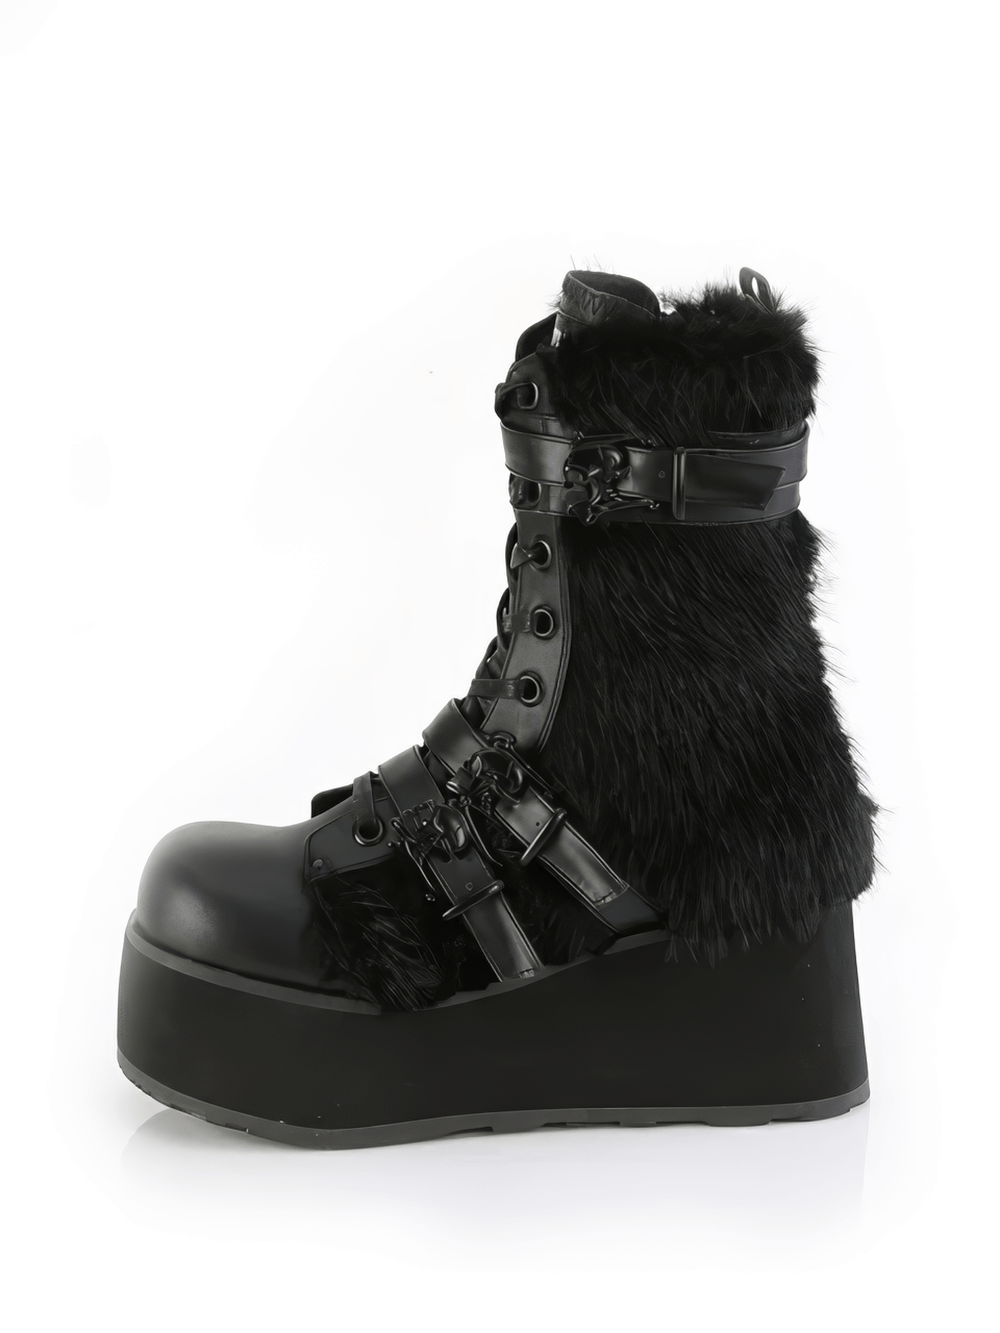 DEMONIA Leather Black Mid-Calf Boots with Skull Accents